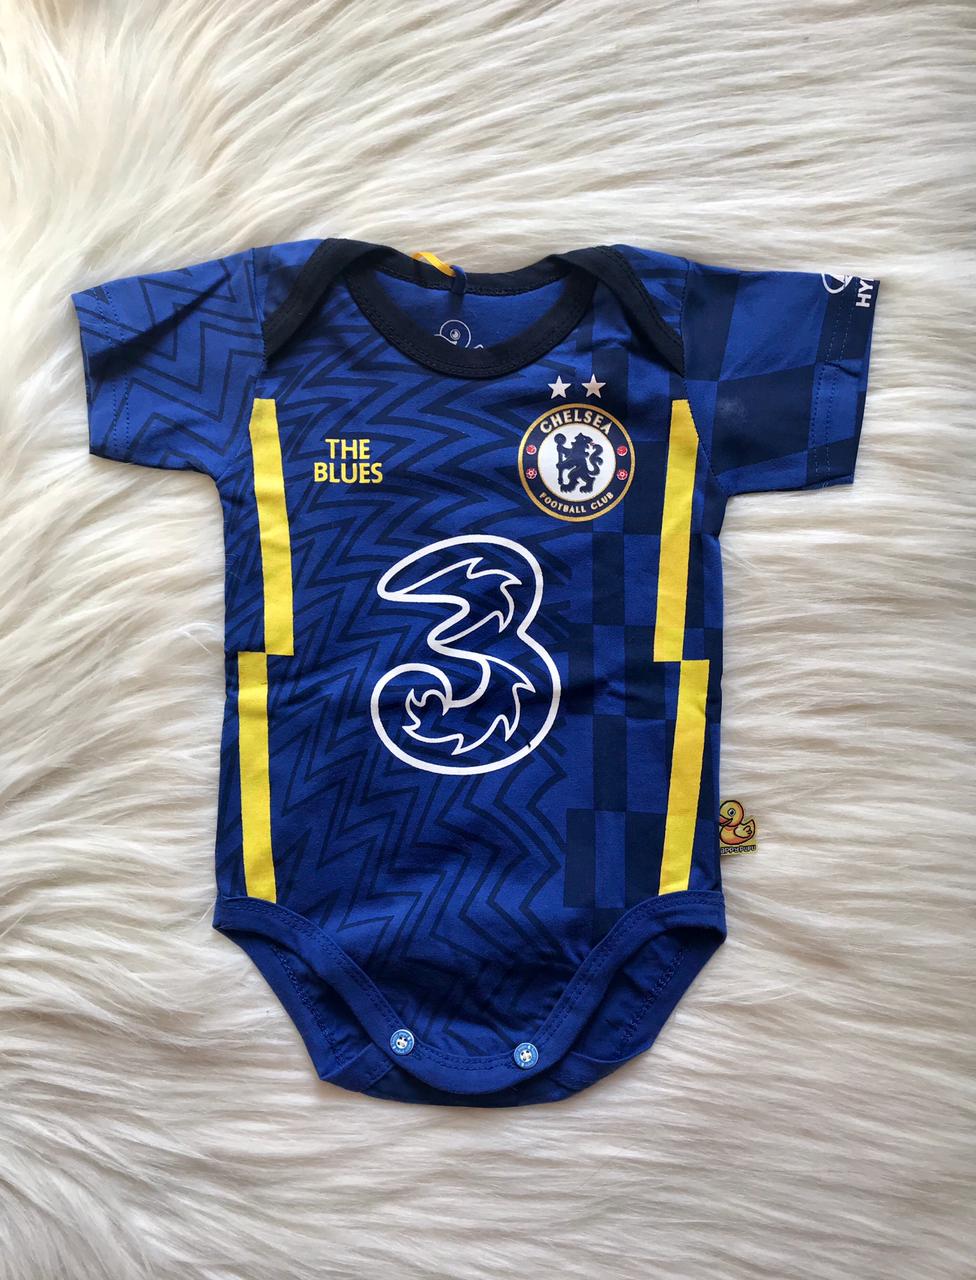 baby-fair Melomoo Baby Football Jumper Chelsea Home Clothing Set